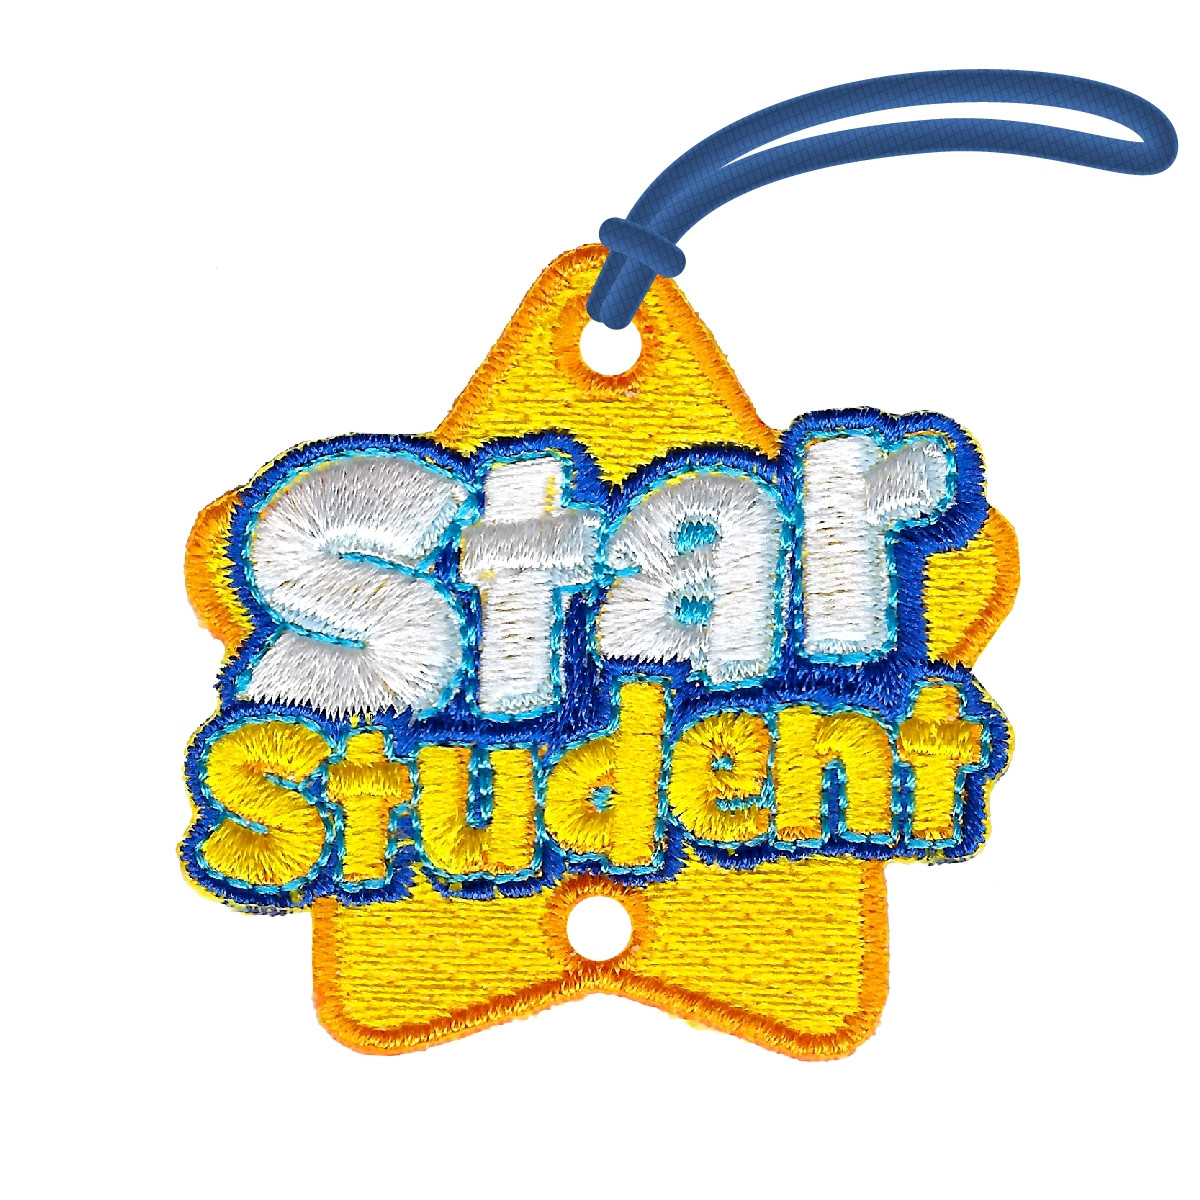 PATCH Tag - Star Student